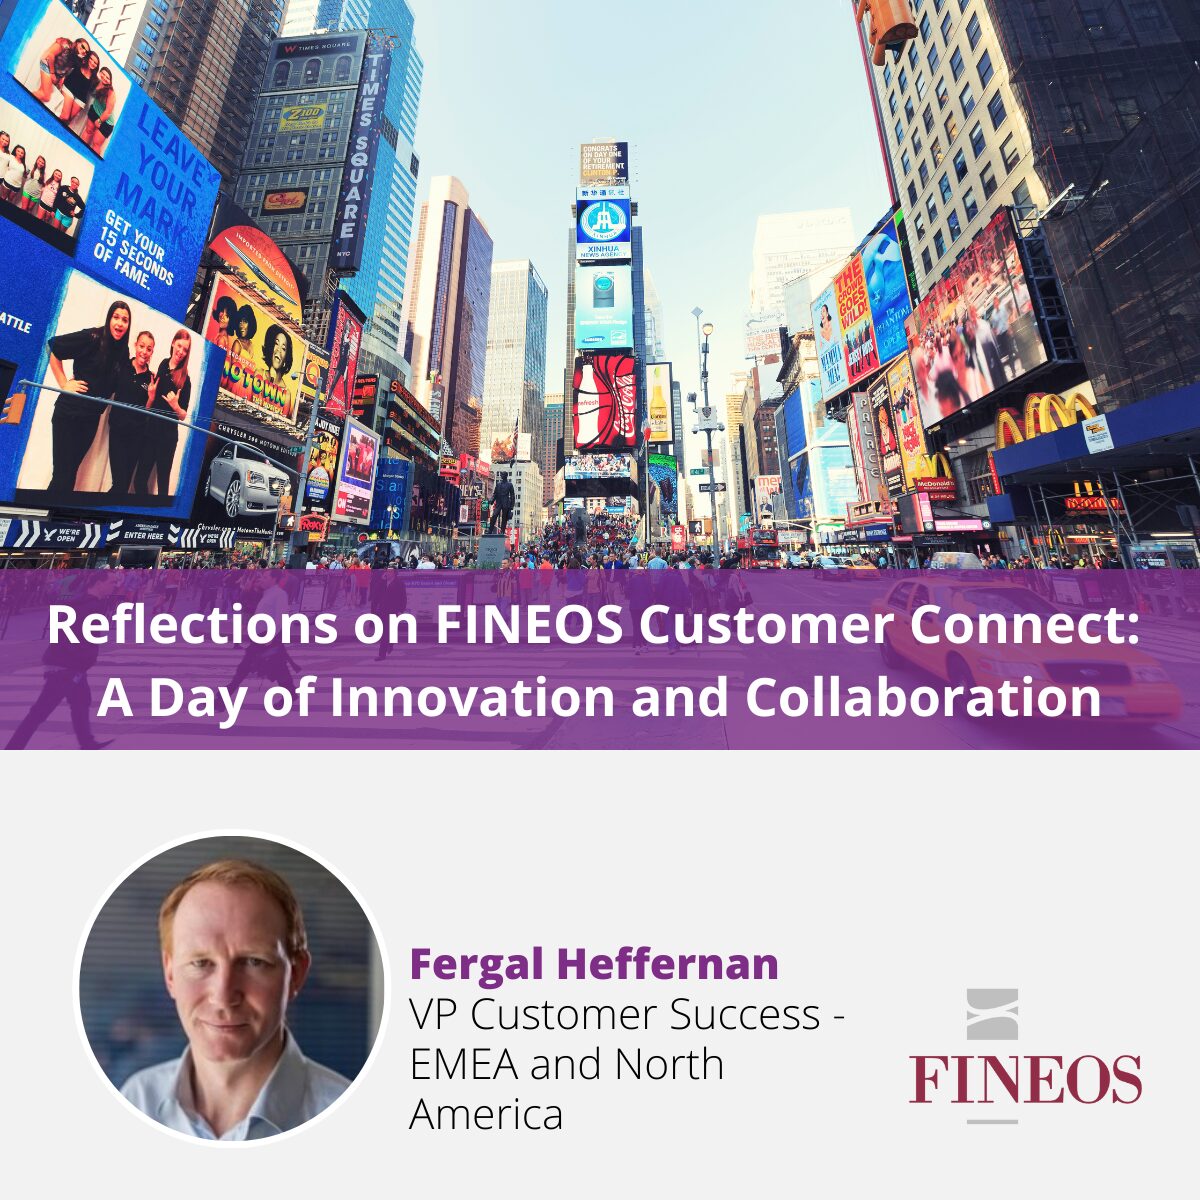 Reflections on FINEOS Customer Connect: A Day of Innovation and Collaboration